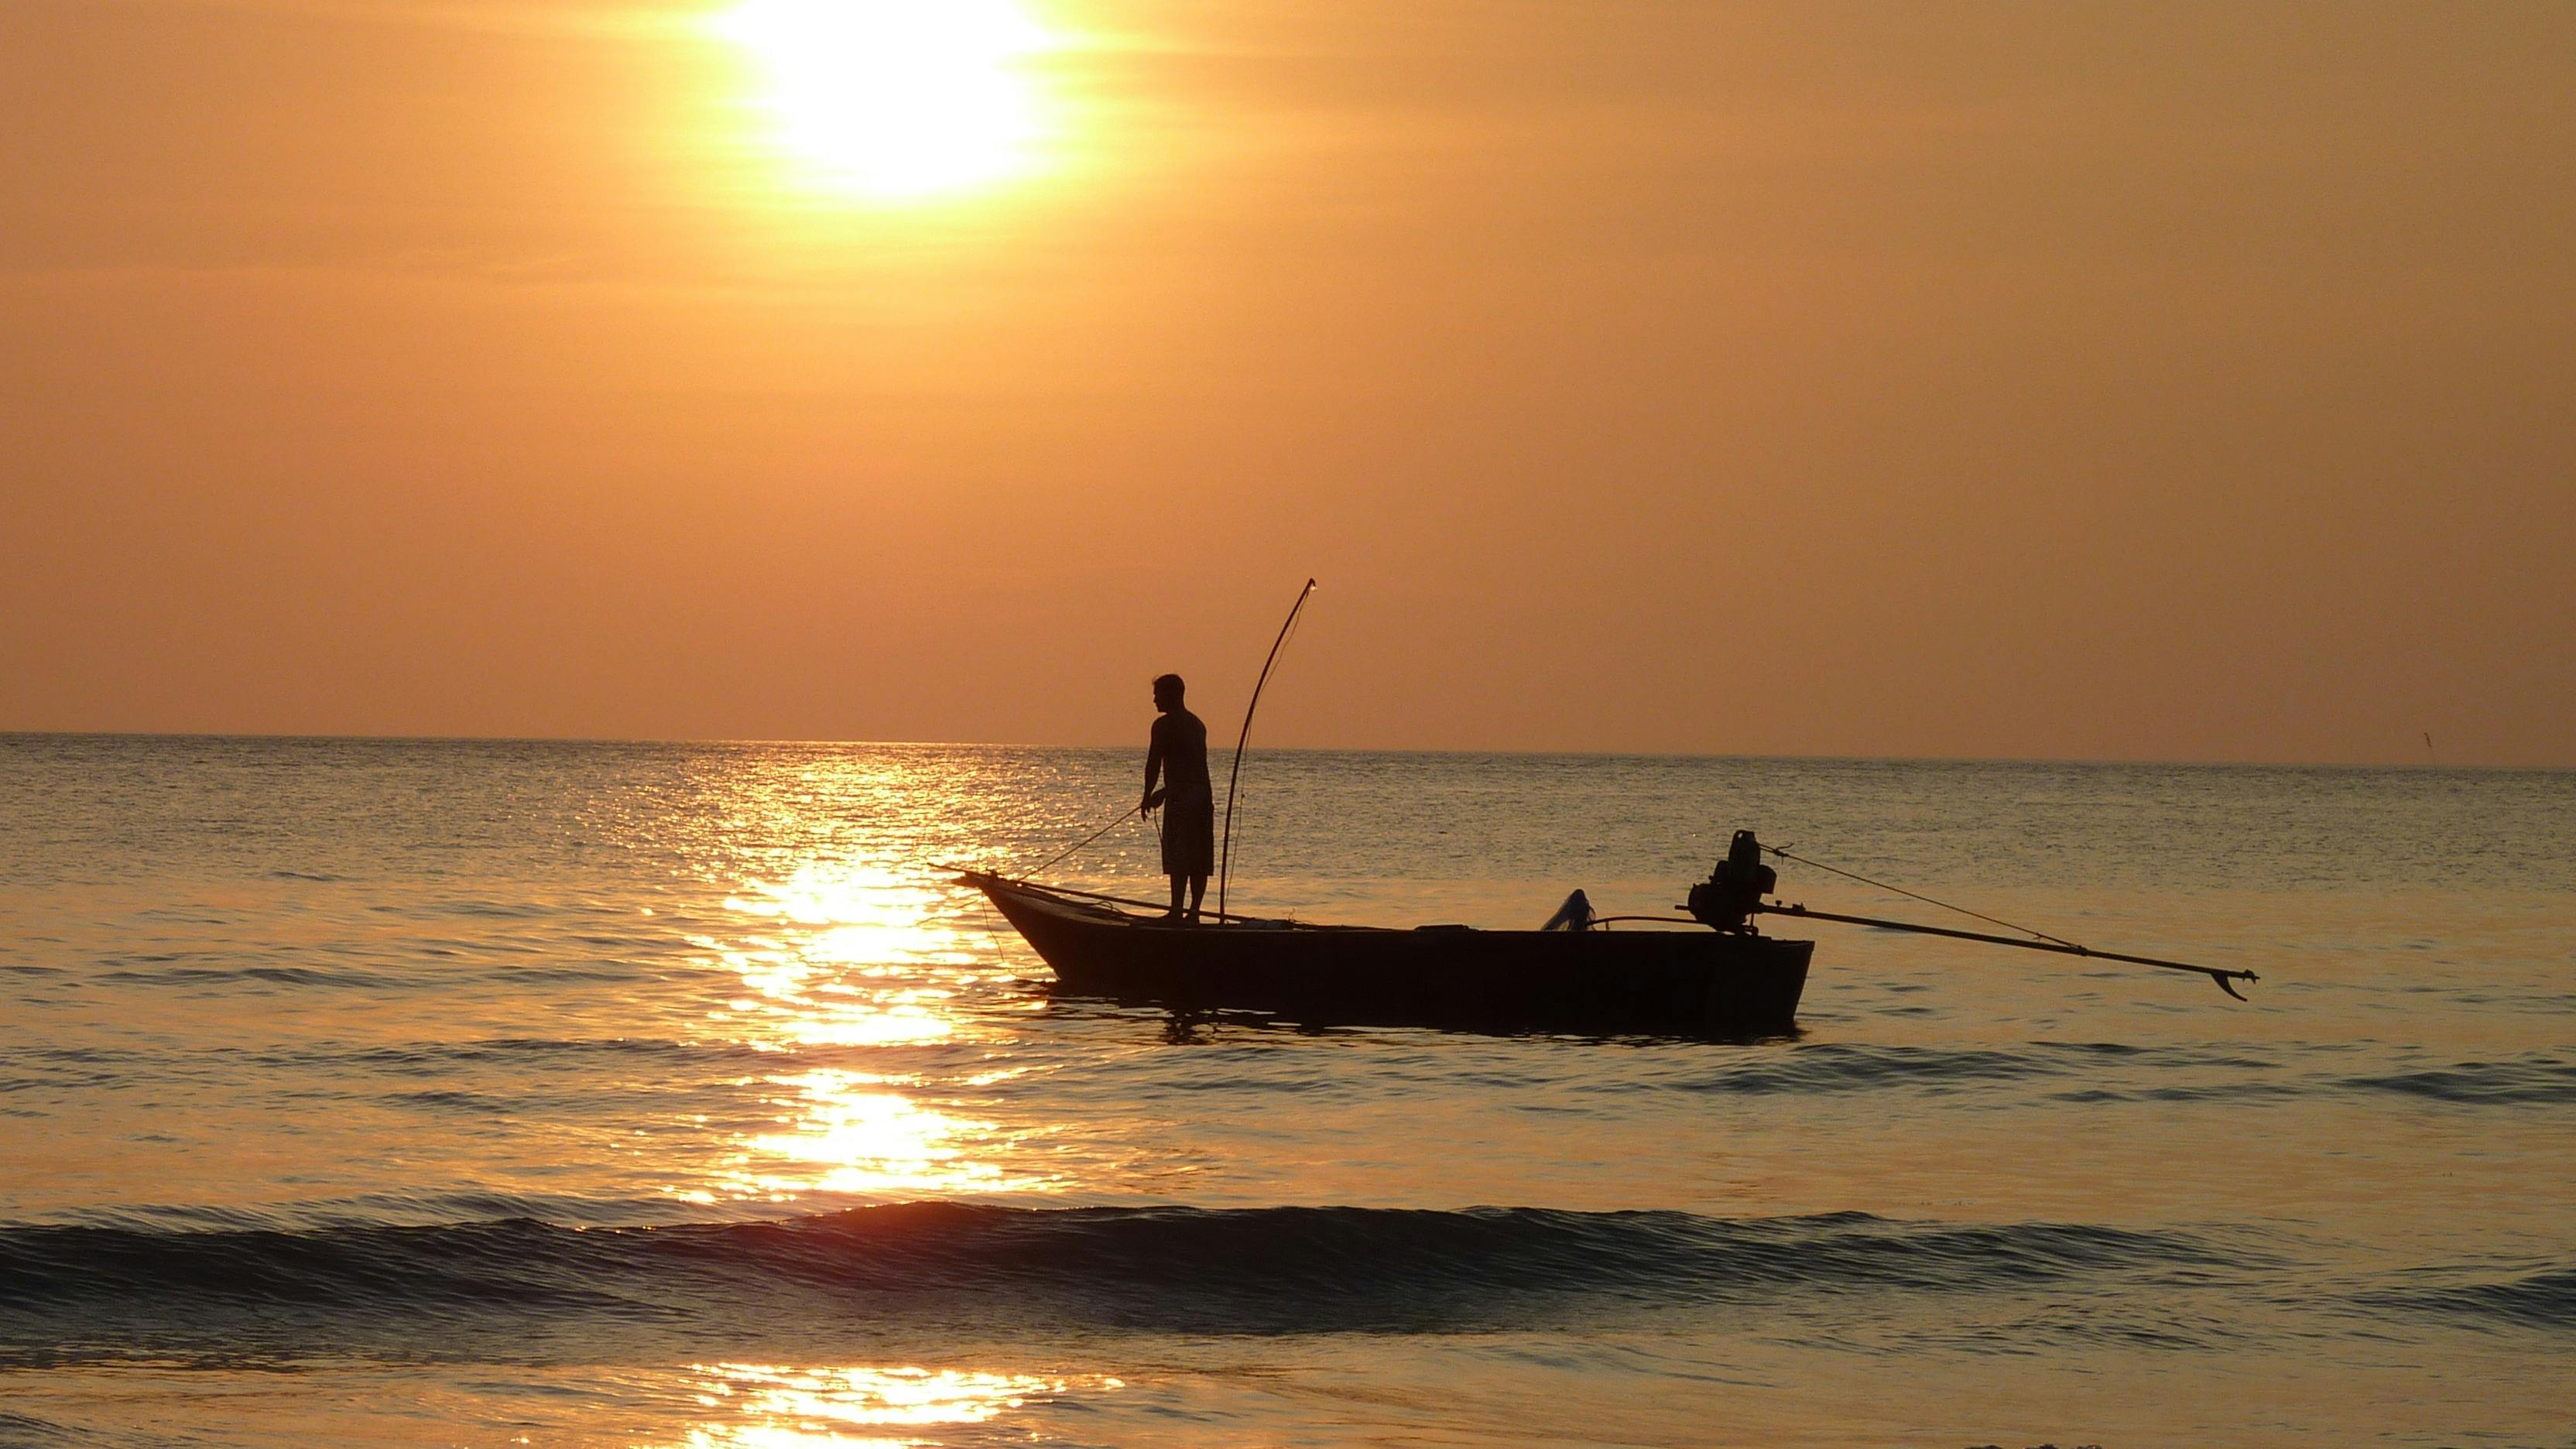 Silhouette Photography of Two Fishermen on Boat during Sunset